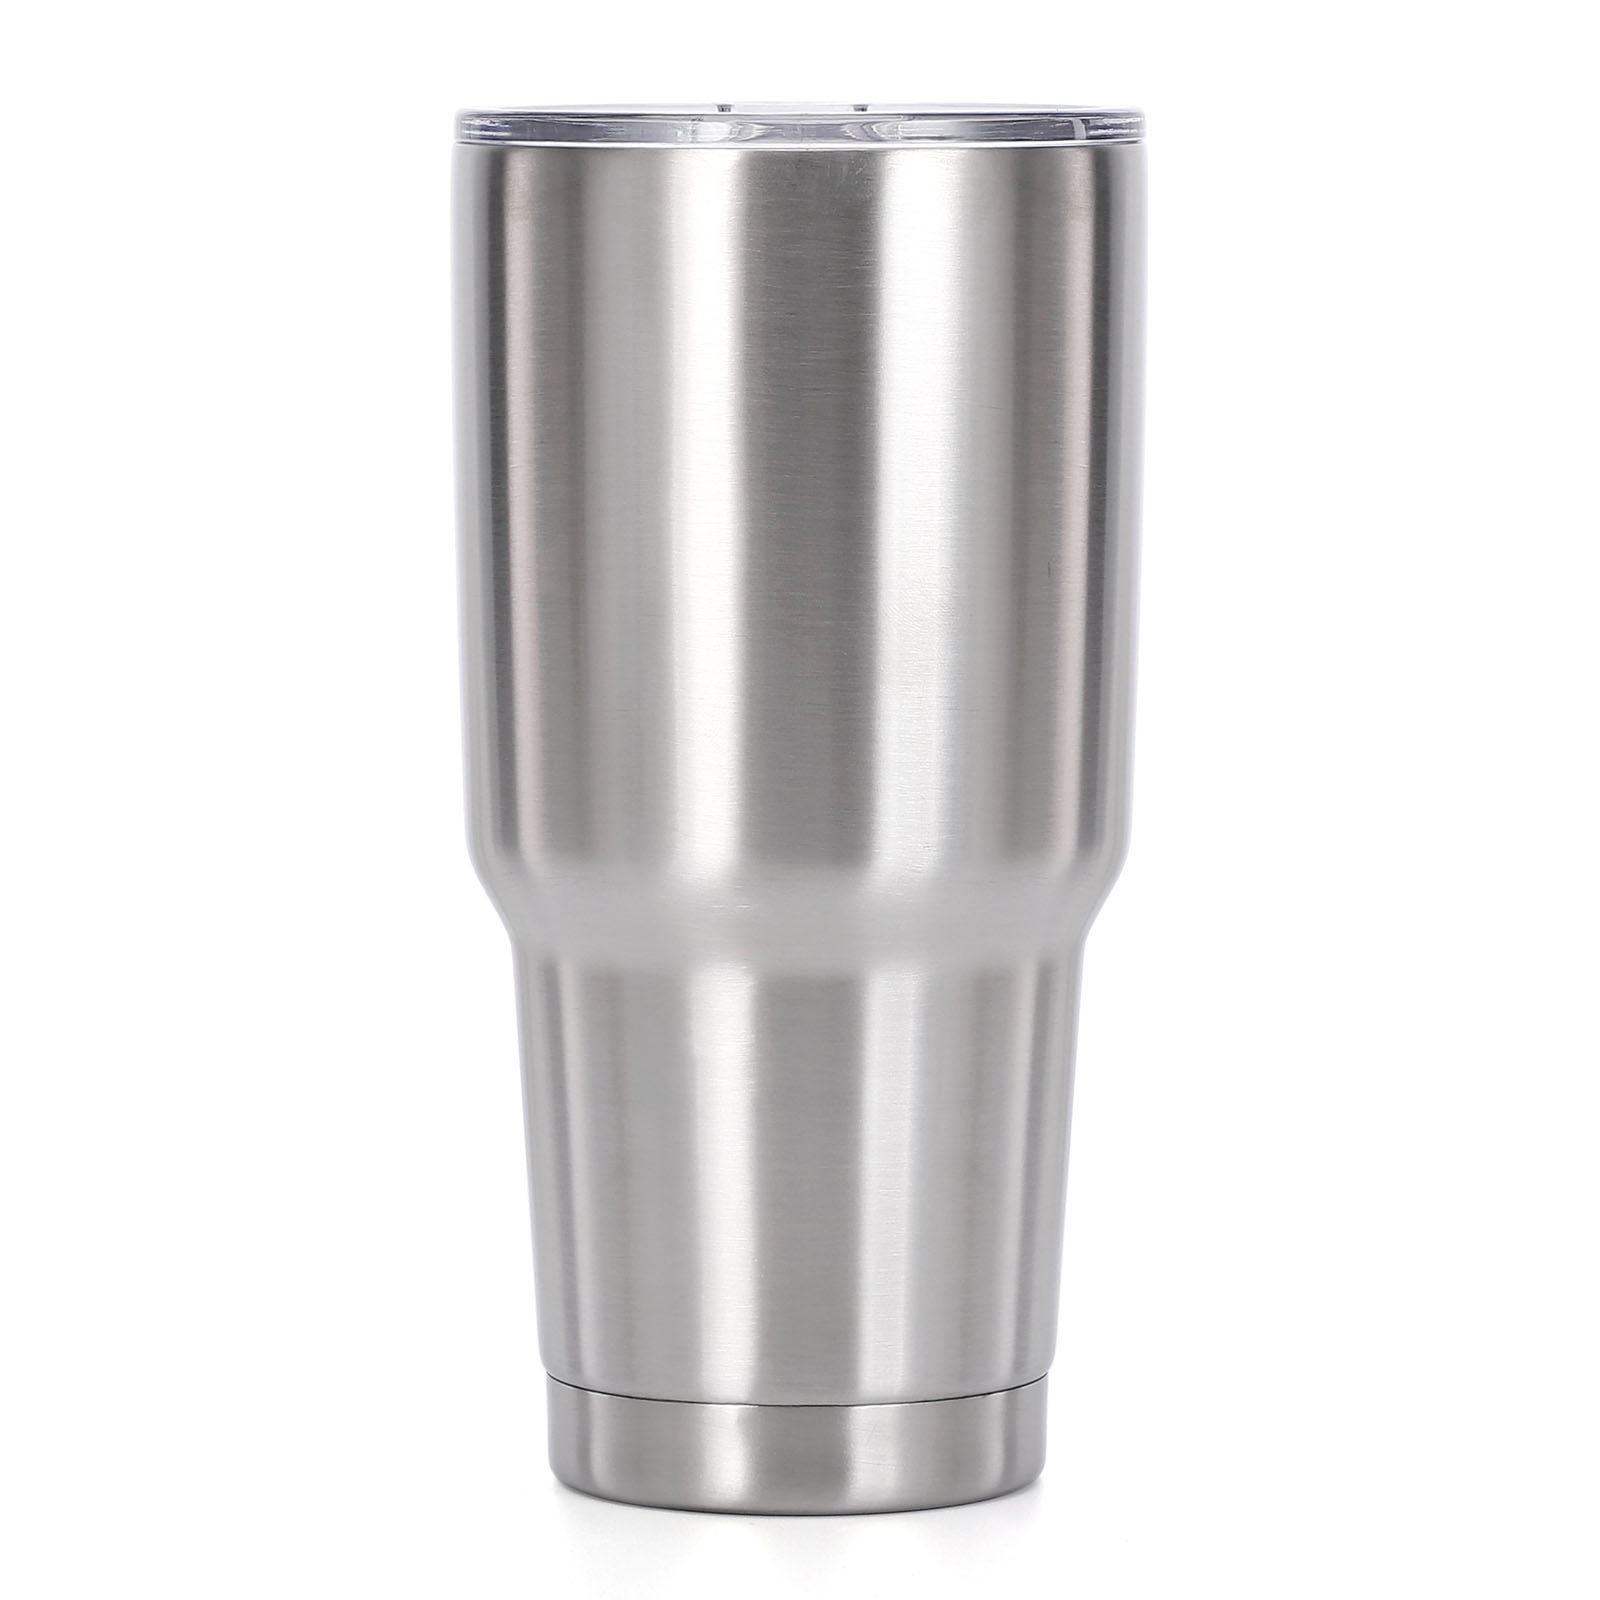 Affordable Stainless Steel Double Wall Insulated Tumblers Cups